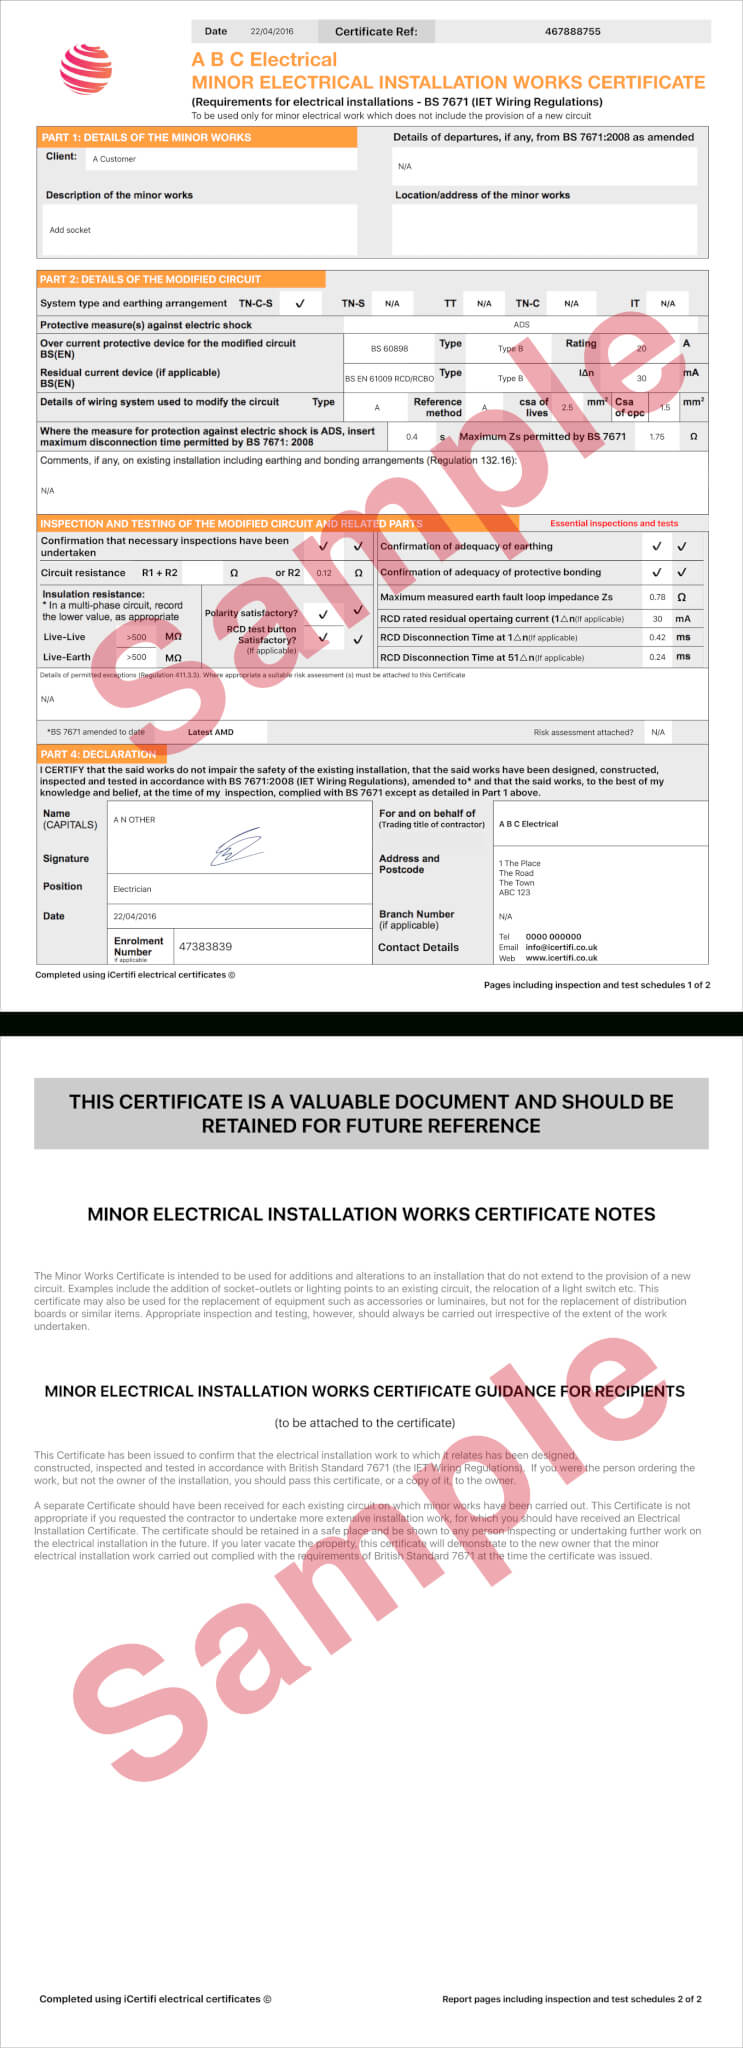 Electrical Certificate - Example Minor Works Certificate Inside Minor Electrical Installation Works Certificate Template